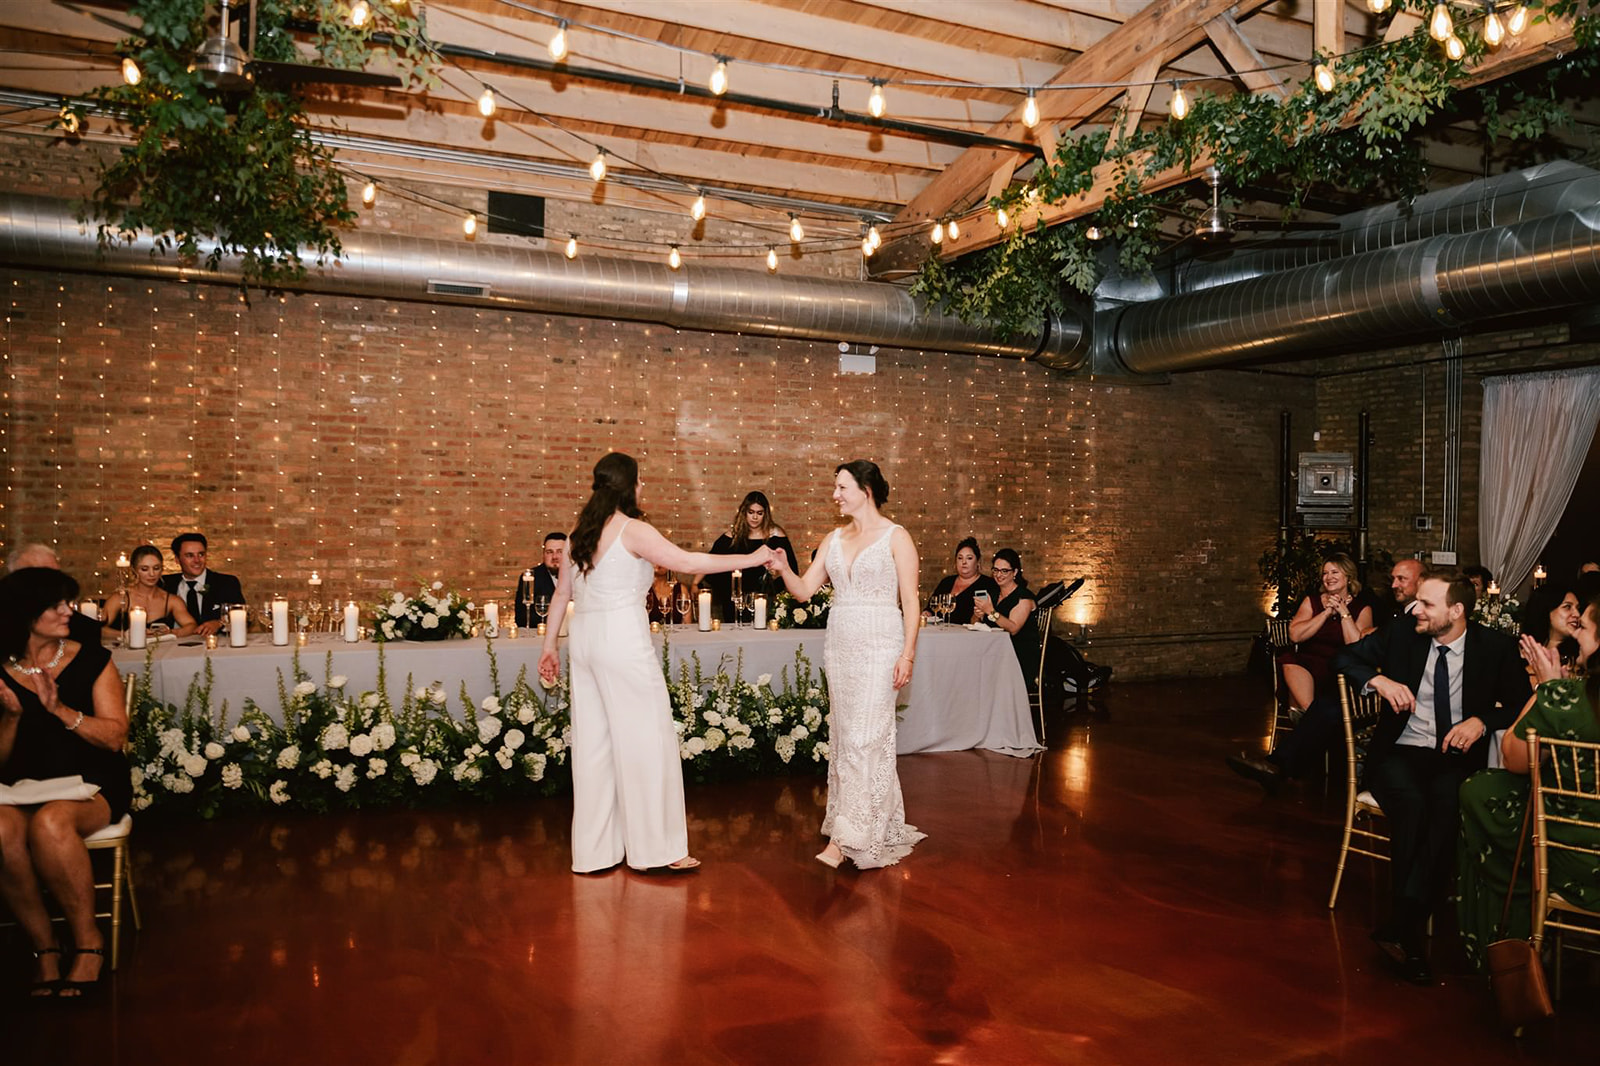 Two brides sharing their first dance at Loft on Lake, showcasing a moment of love and celebration.